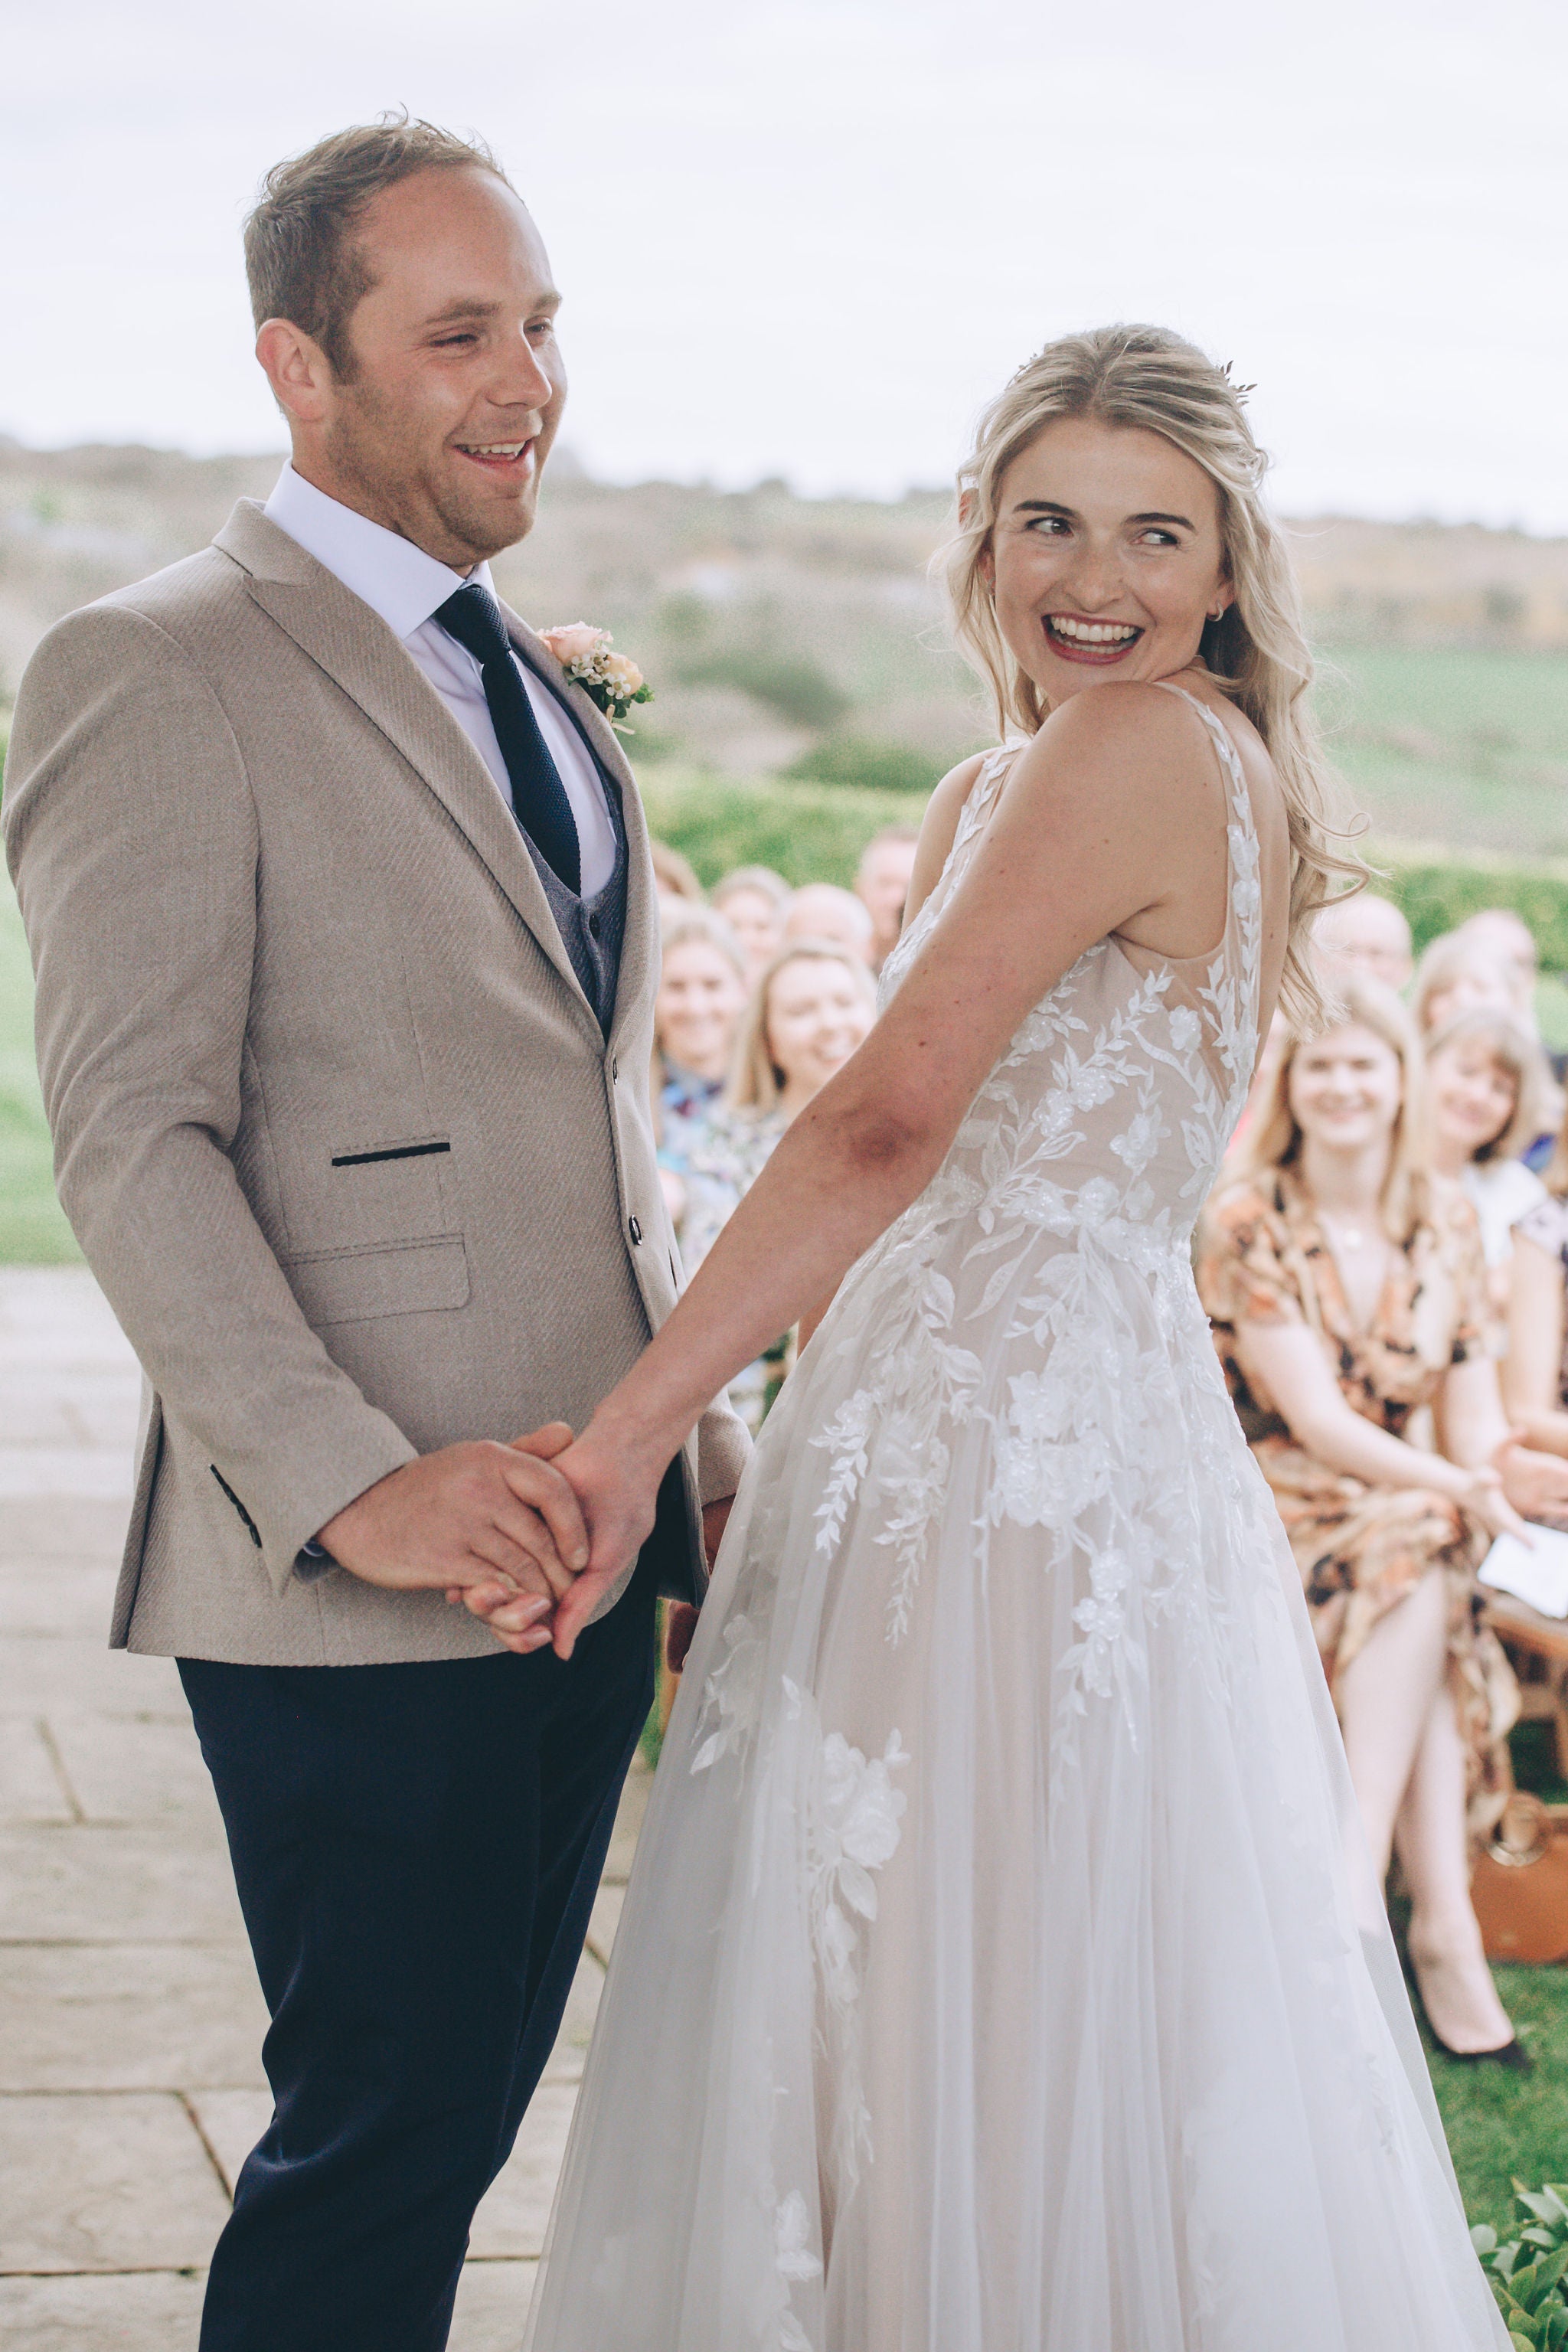 Couple smiling during wedding ceremony at Trevenna